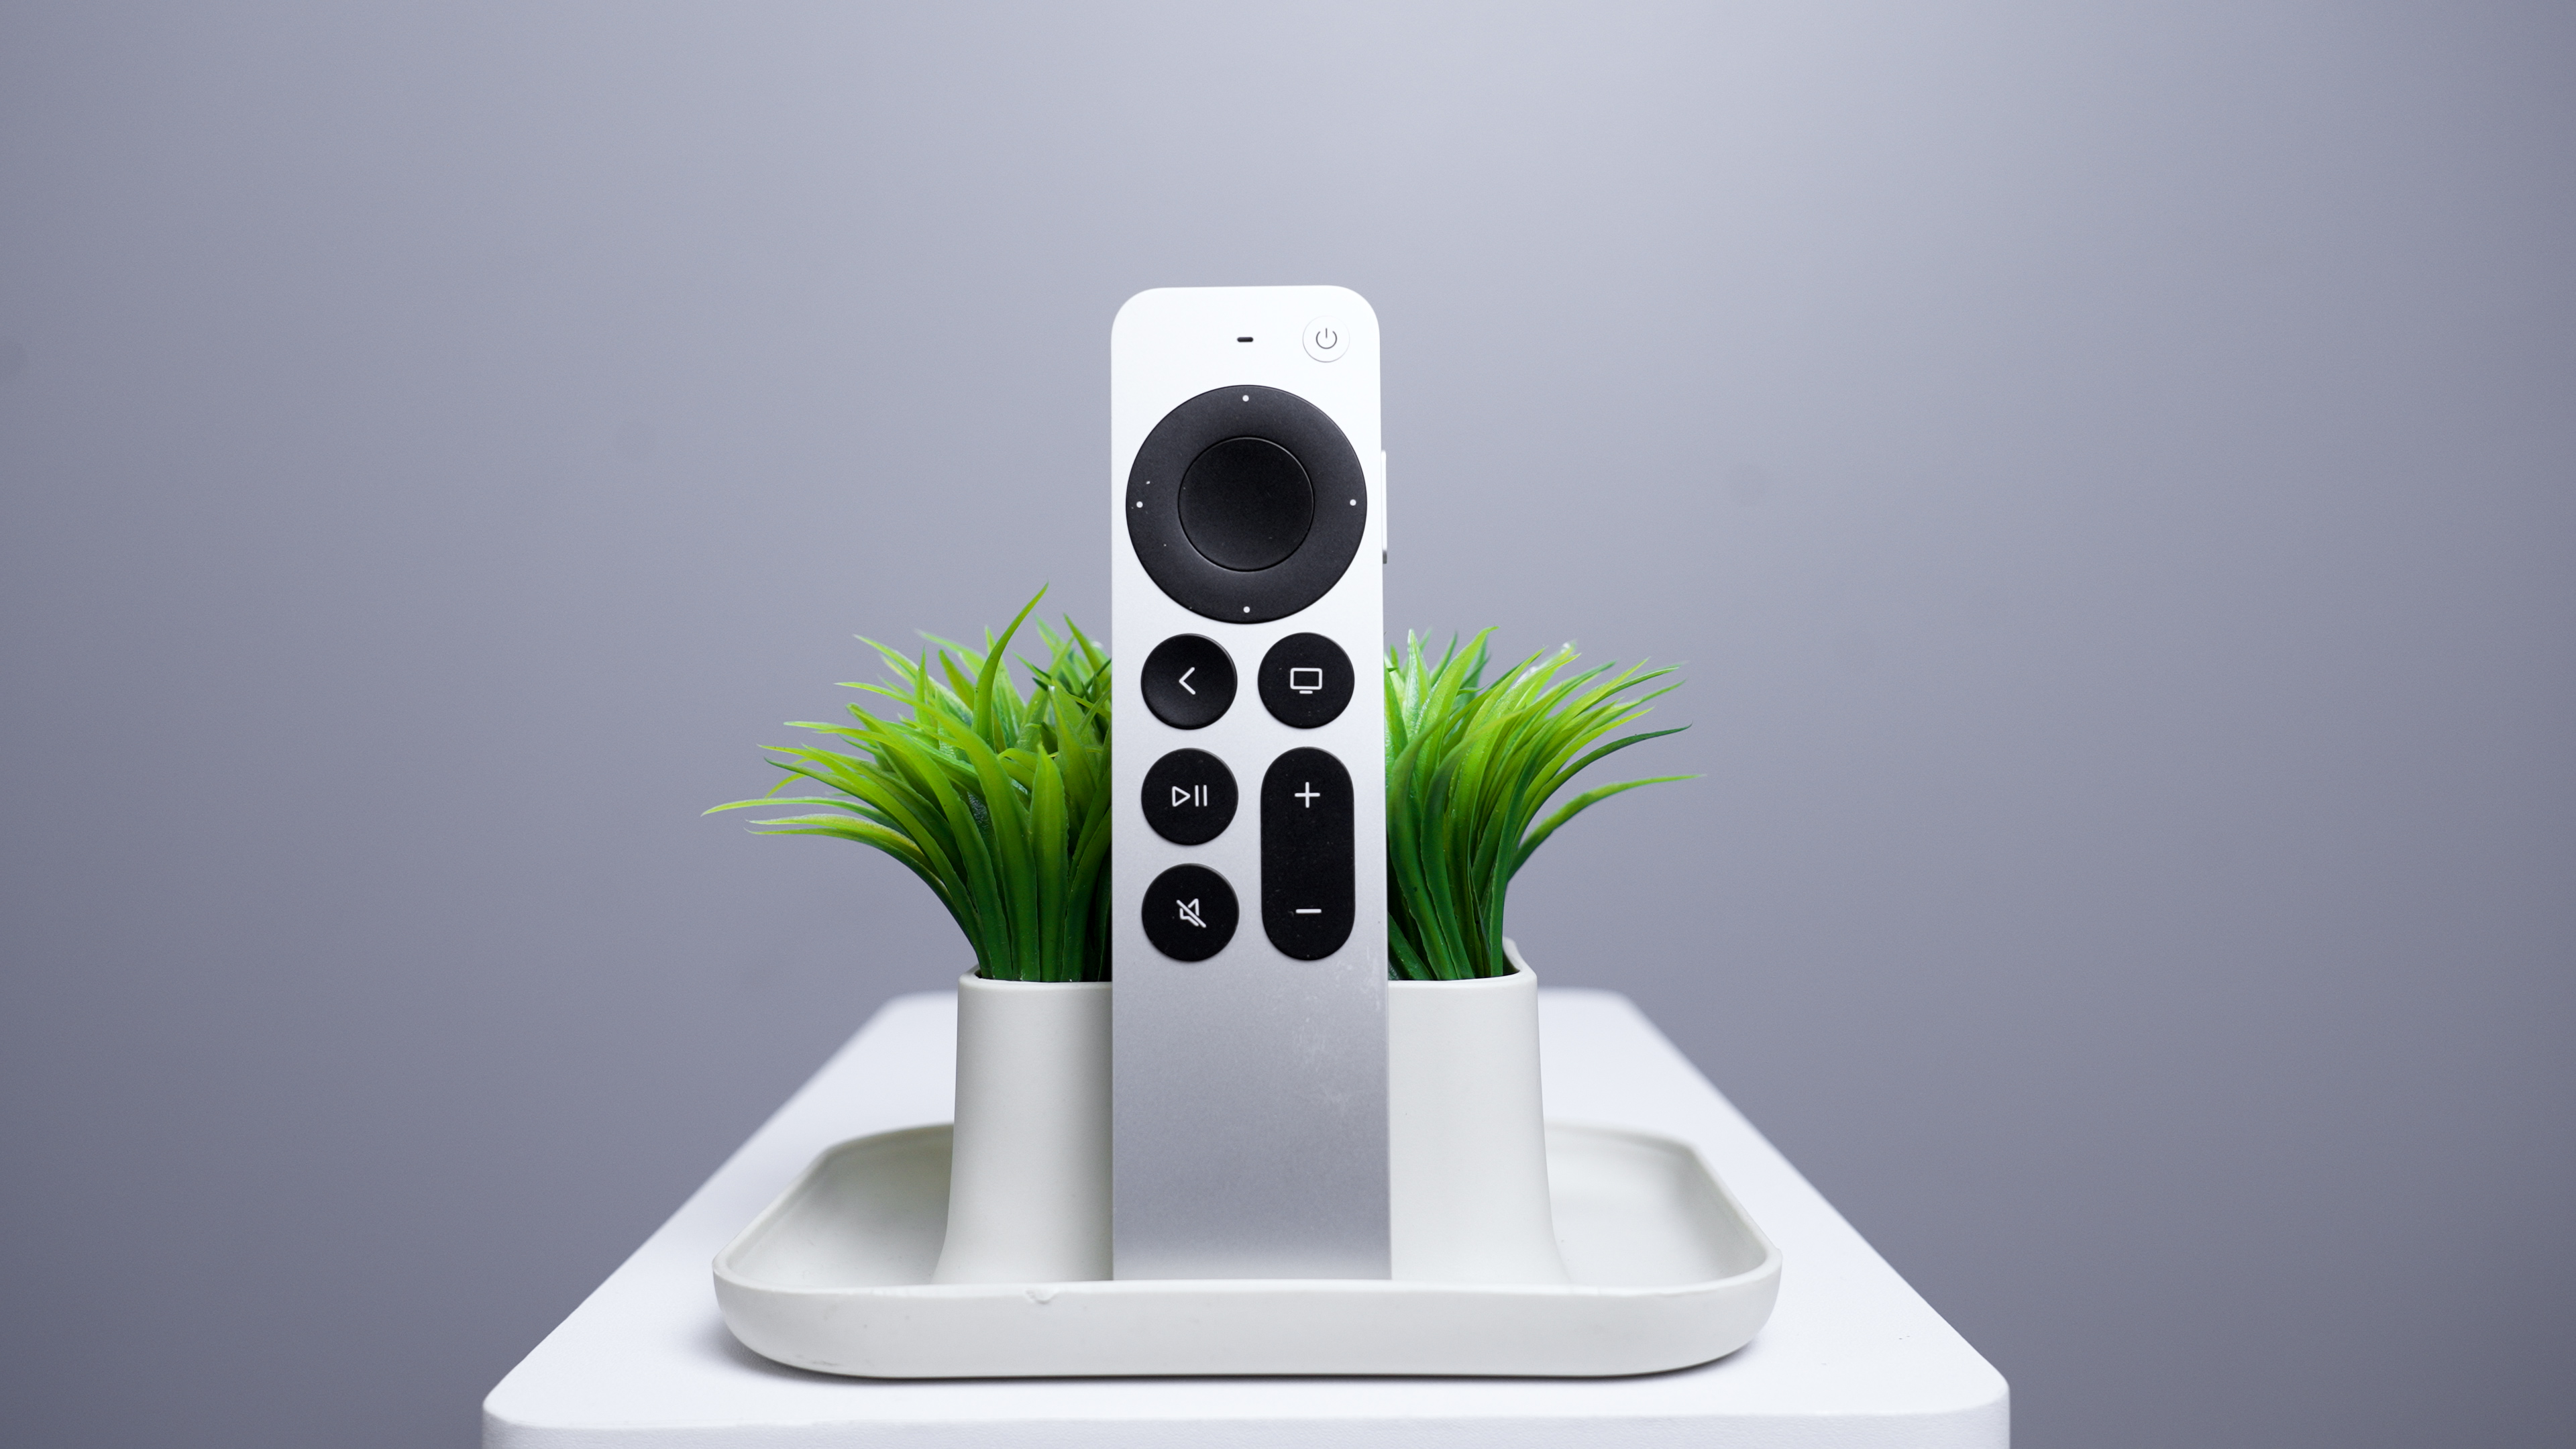 The new Apple TV 4K Siri remote featuring a USB-C connector